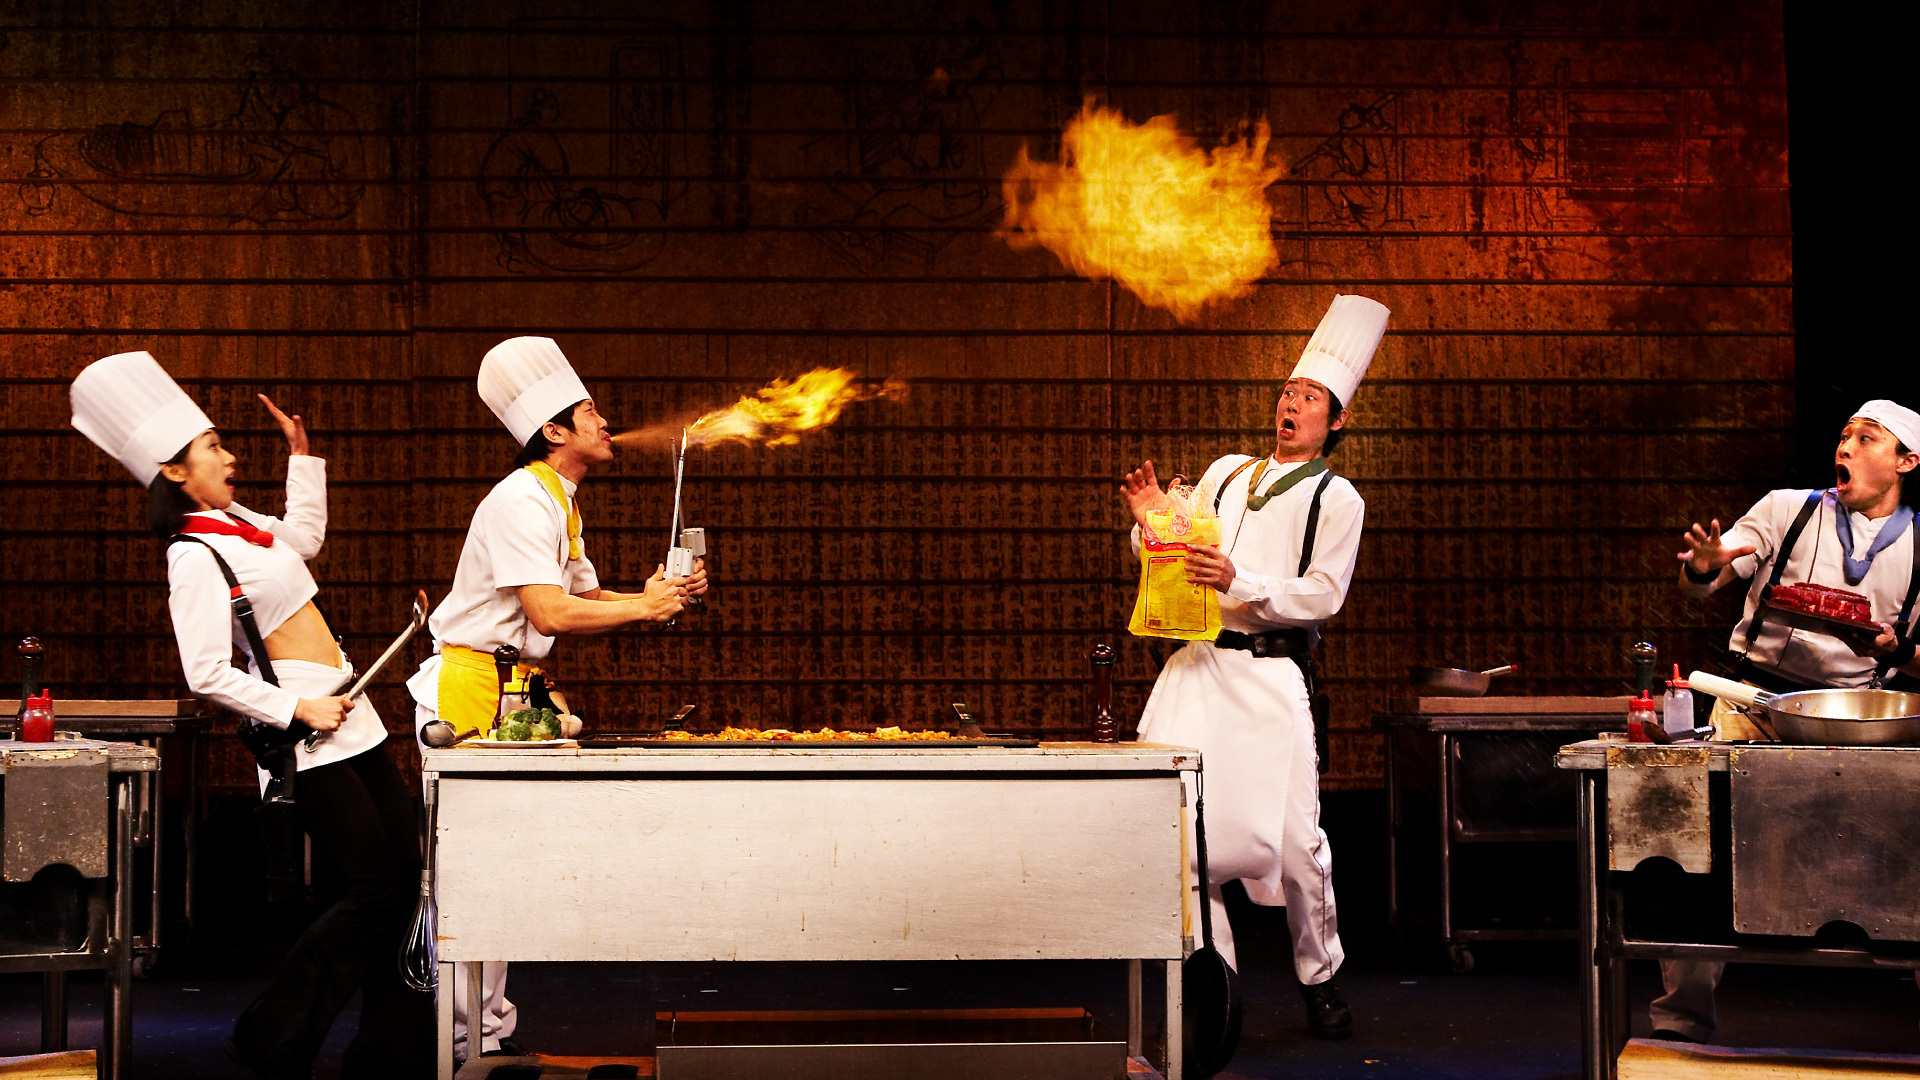 A chef breathes a cloud of fire, beside him, three surprised chefs recoil.